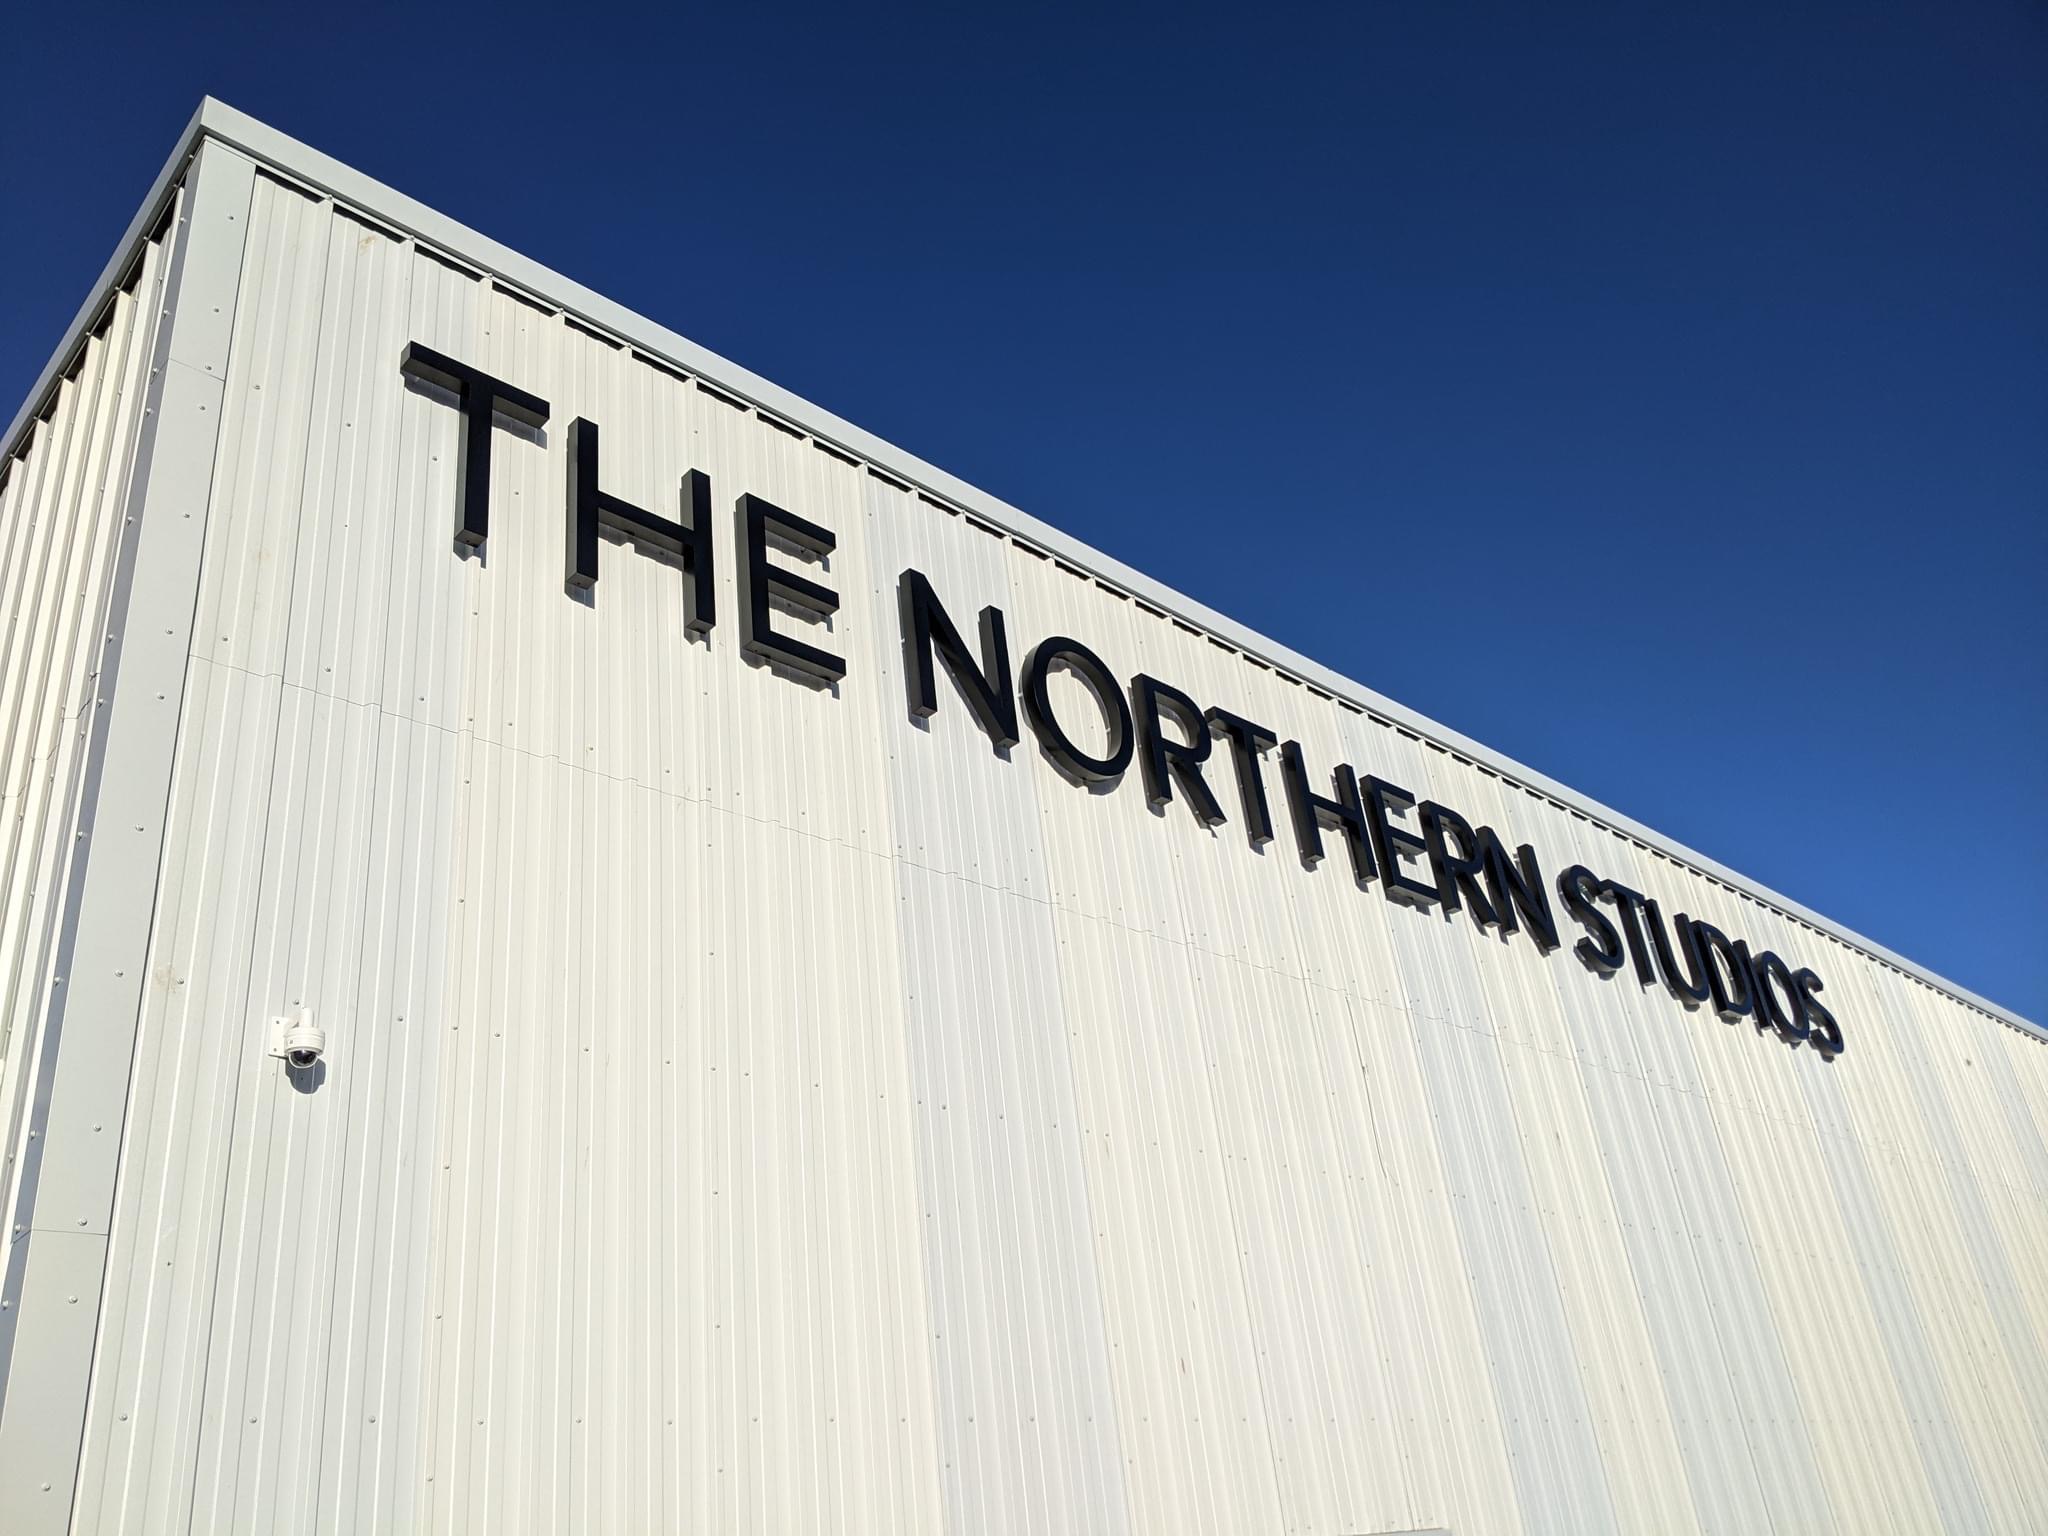 Could your business supply Hartlepool’s growing film and TV industry?